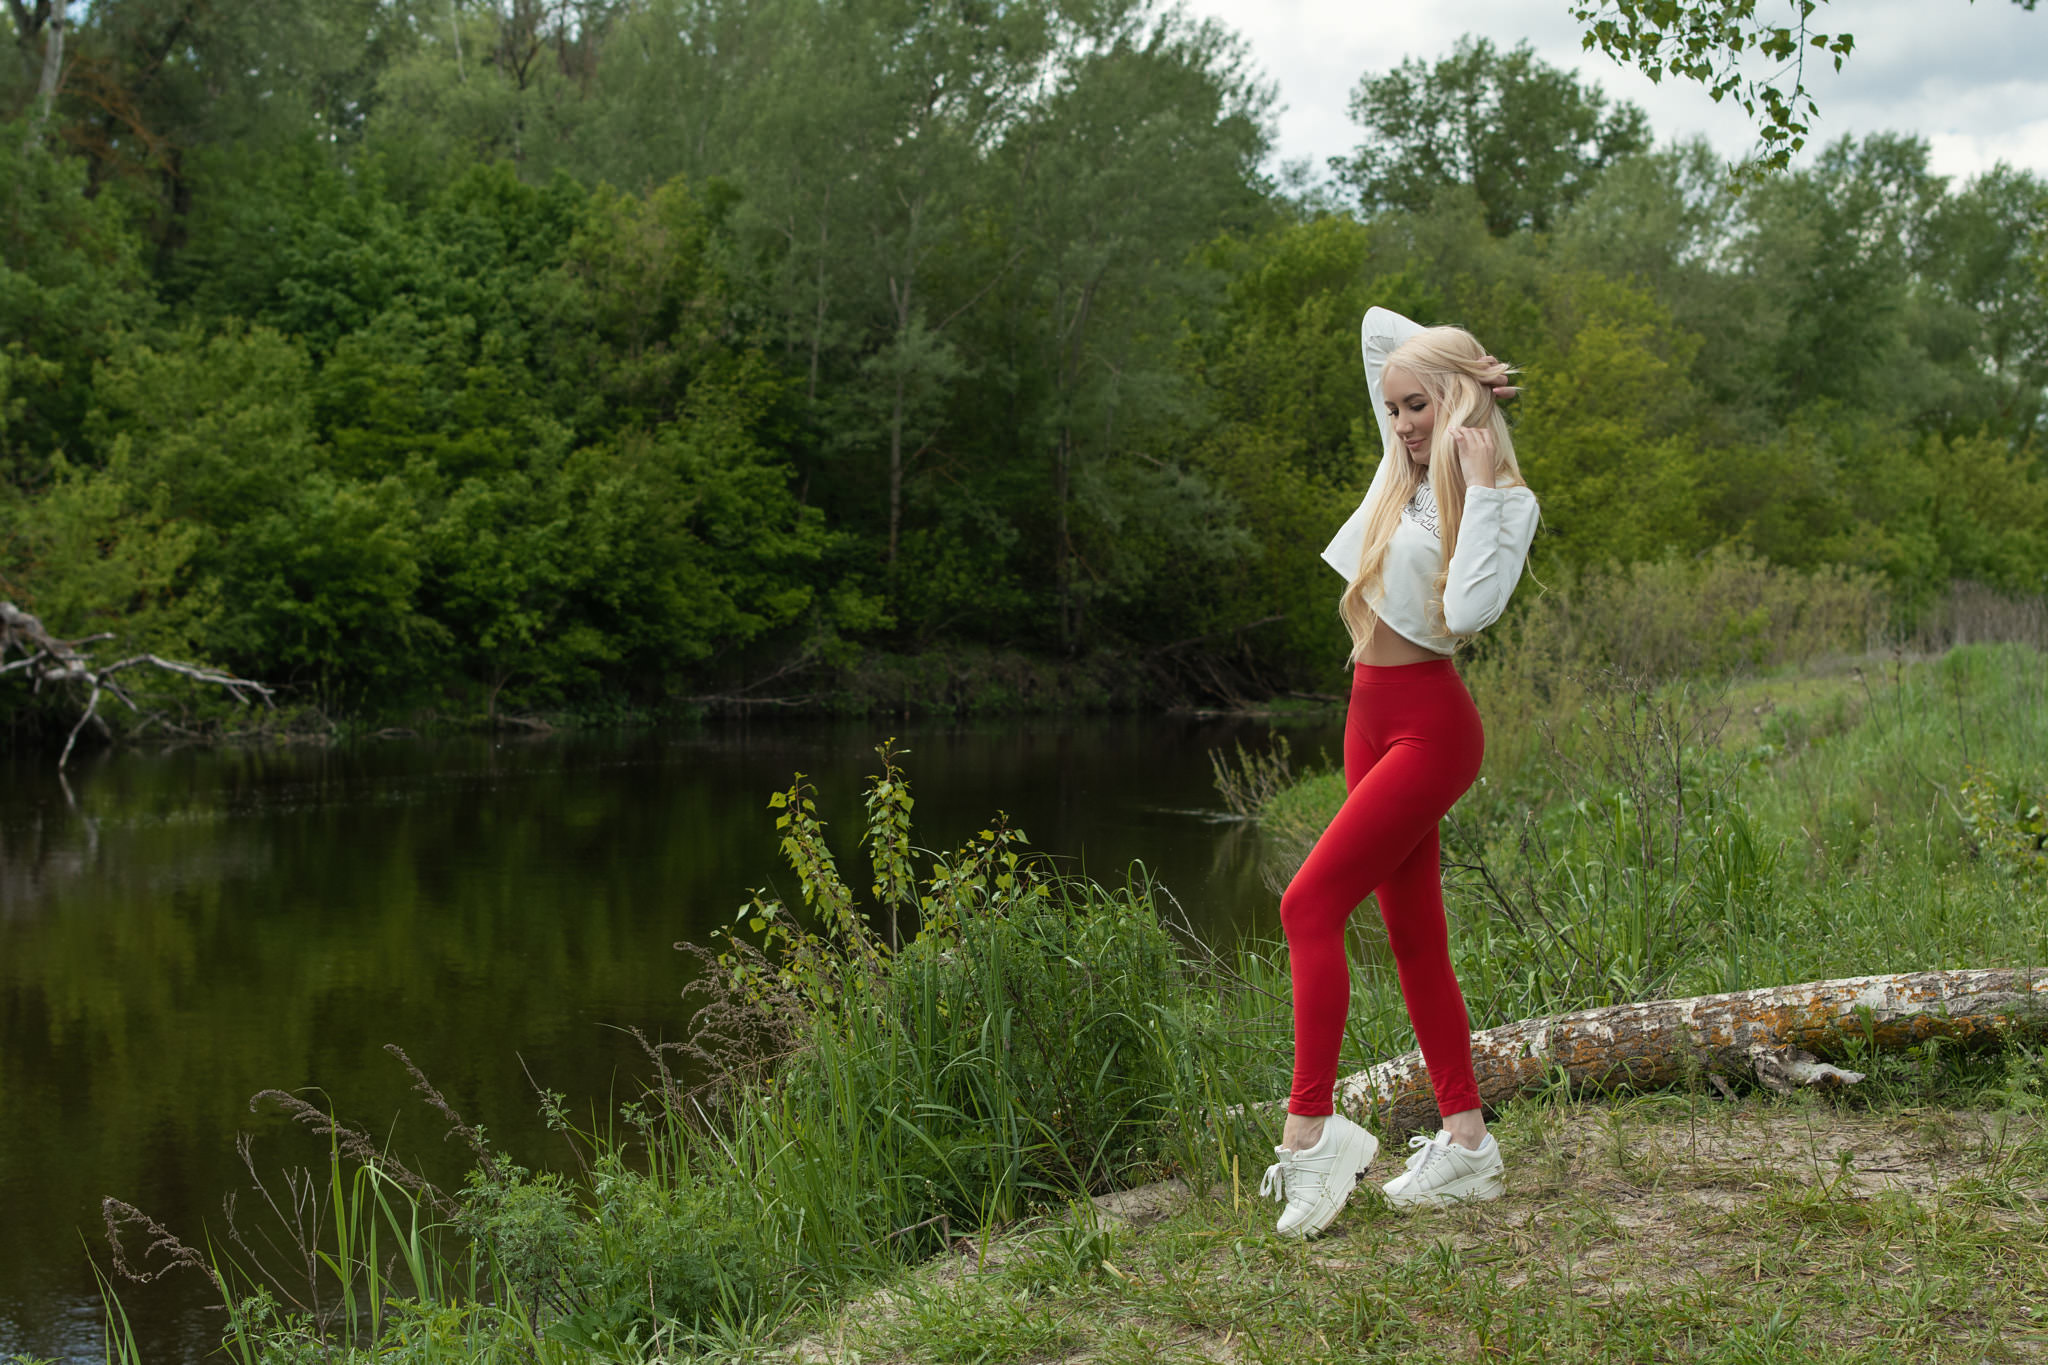 Women River Sneakers Blonde Smiling Women Outdoors Nature Red Pants 2048x1365